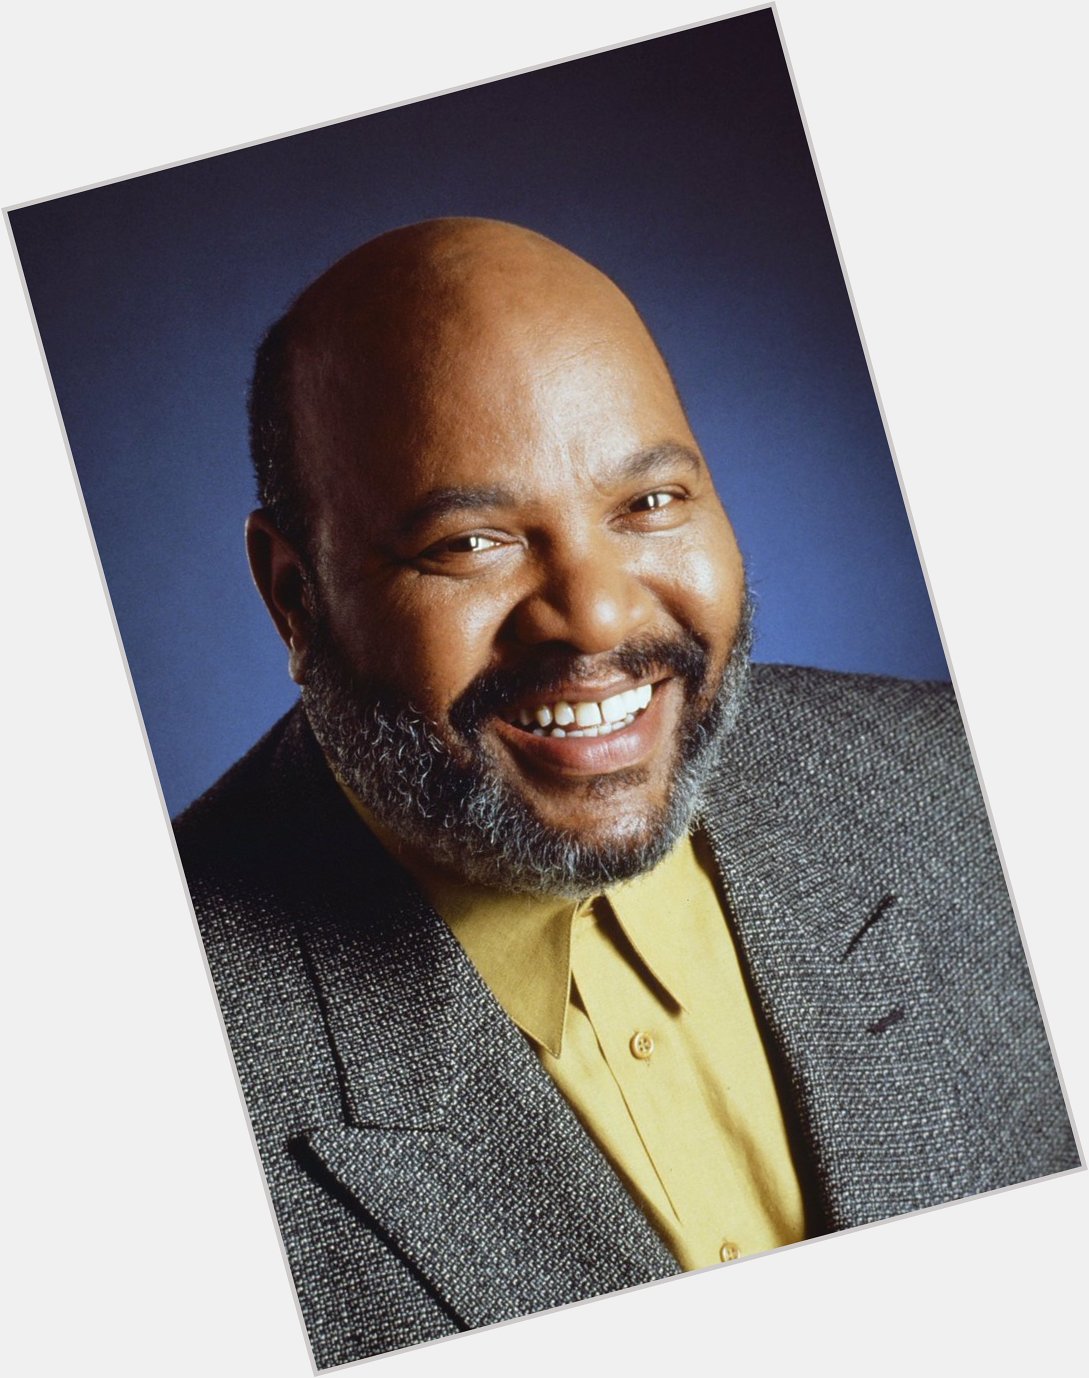 Happy birthday James Avery! RIP Uncle Phil 